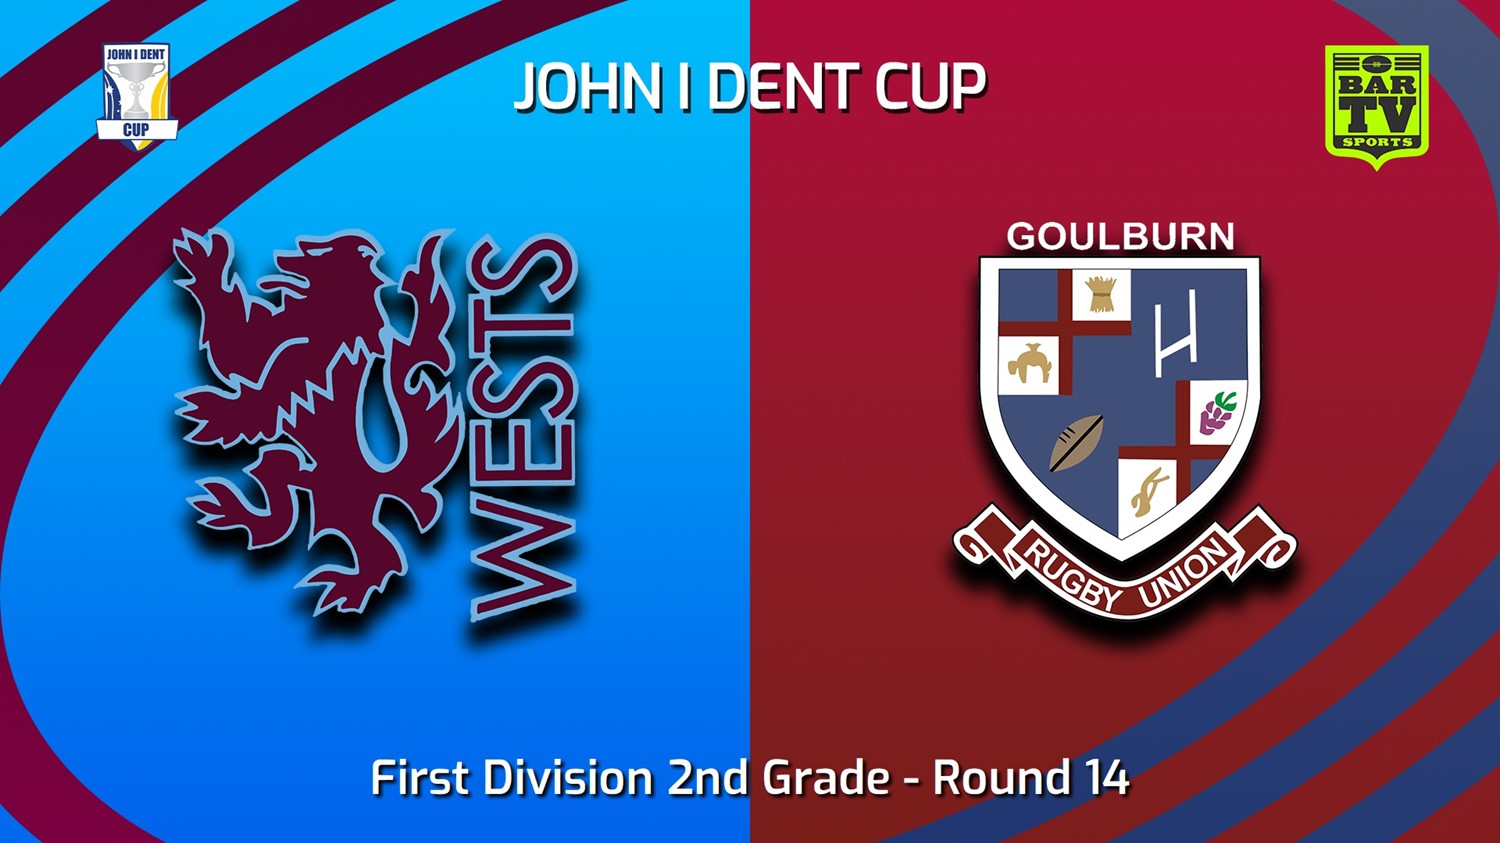 230715-John I Dent (ACT) Round 14 - First Division 2nd Grade - Wests Lions v Goulburn Dirty Reds Slate Image